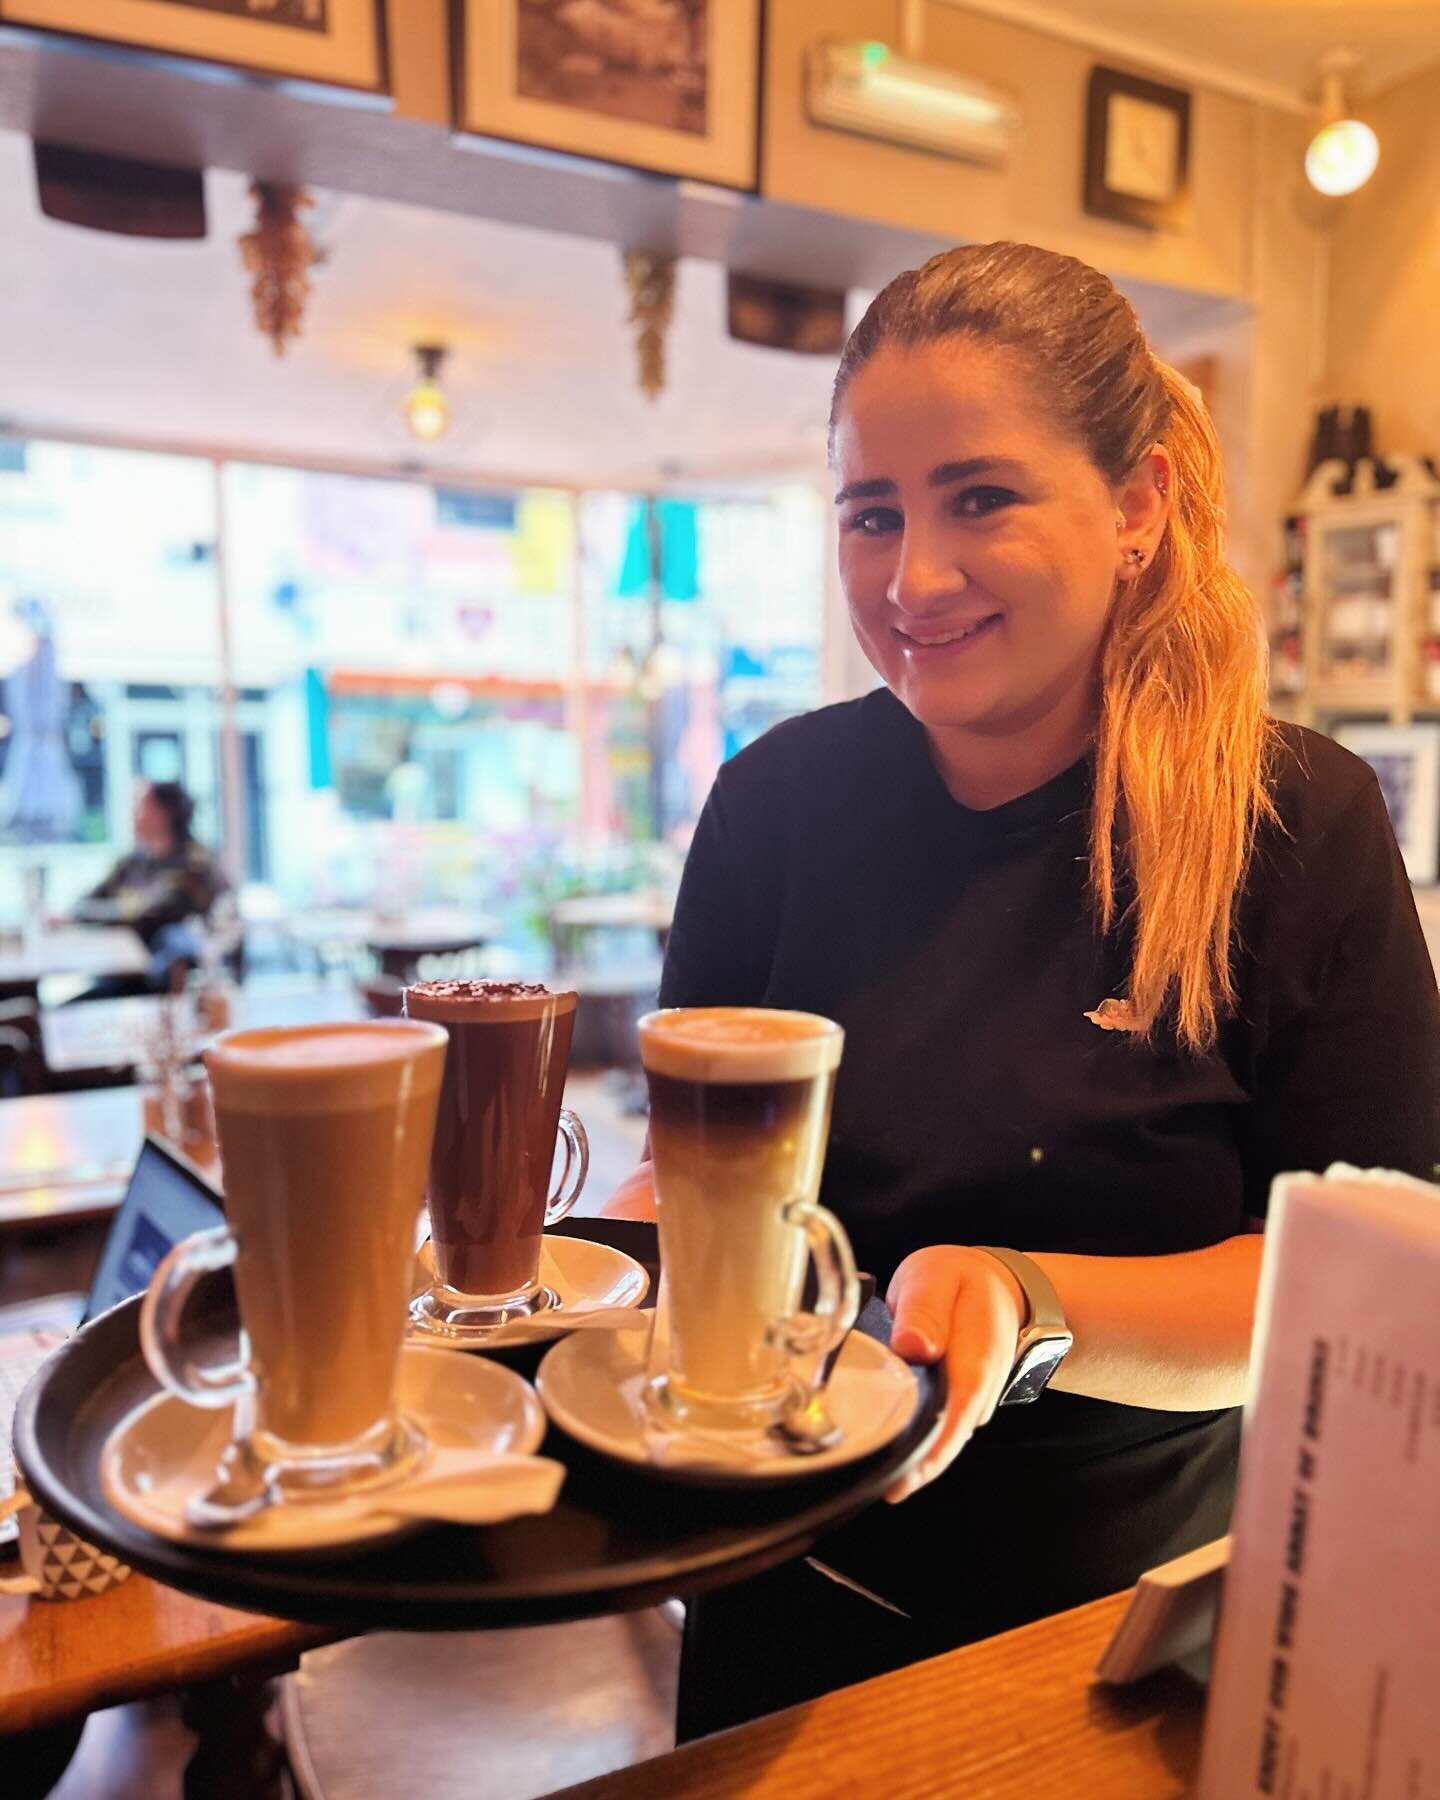 Happy Sunday everyone! 😊 we are open and ready to welcome you 🤗 Stop by for a coffee, to have lunch or to say hello 😃👋🏻

#restaurant #cafe #brighton #brightonrestaurant #northlainesbrighton #brightoncafe #brightonandhove #brightonfood #brightonl